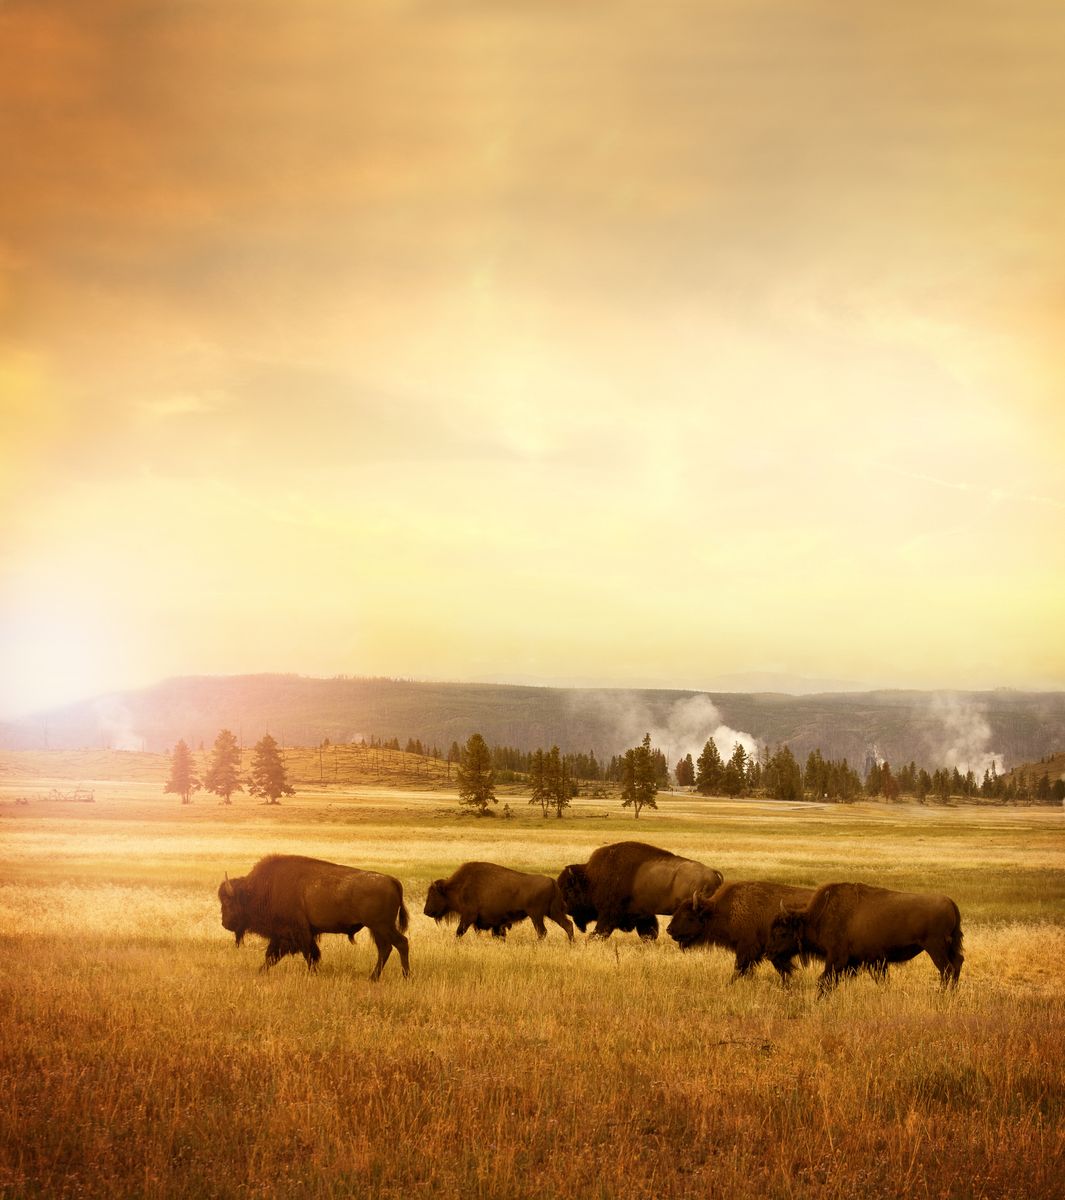 <p>Yellowstone is the ultimate girls' trip destination for outdoor lovers. Whether you want to head to the national park for a wildlife tour, soak in local hot springs, or head on incredible hike, you're sure to feel one with nature. We recommend glamping at Under Canvas for the ultimate luxe outdoor experience—nightly s'mores and stargazing included.</p><p><a class="body-btn-link" href="https://go.redirectingat.com?id=74968X1553576&url=https%3A%2F%2Fwww.tripadvisor.com%2FHotel_Review-g45253-d25246991-Reviews-Under_Canvas_North_Yellowstone_Paradise_Valley-Livingston_Montana.html&sref=https%3A%2F%2Fwww.veranda.com%2Ftravel%2Fweekend-guides%2Fg46628435%2Fbest-places-for-girls-trip-in-usa%2F">Shop Now</a></p>